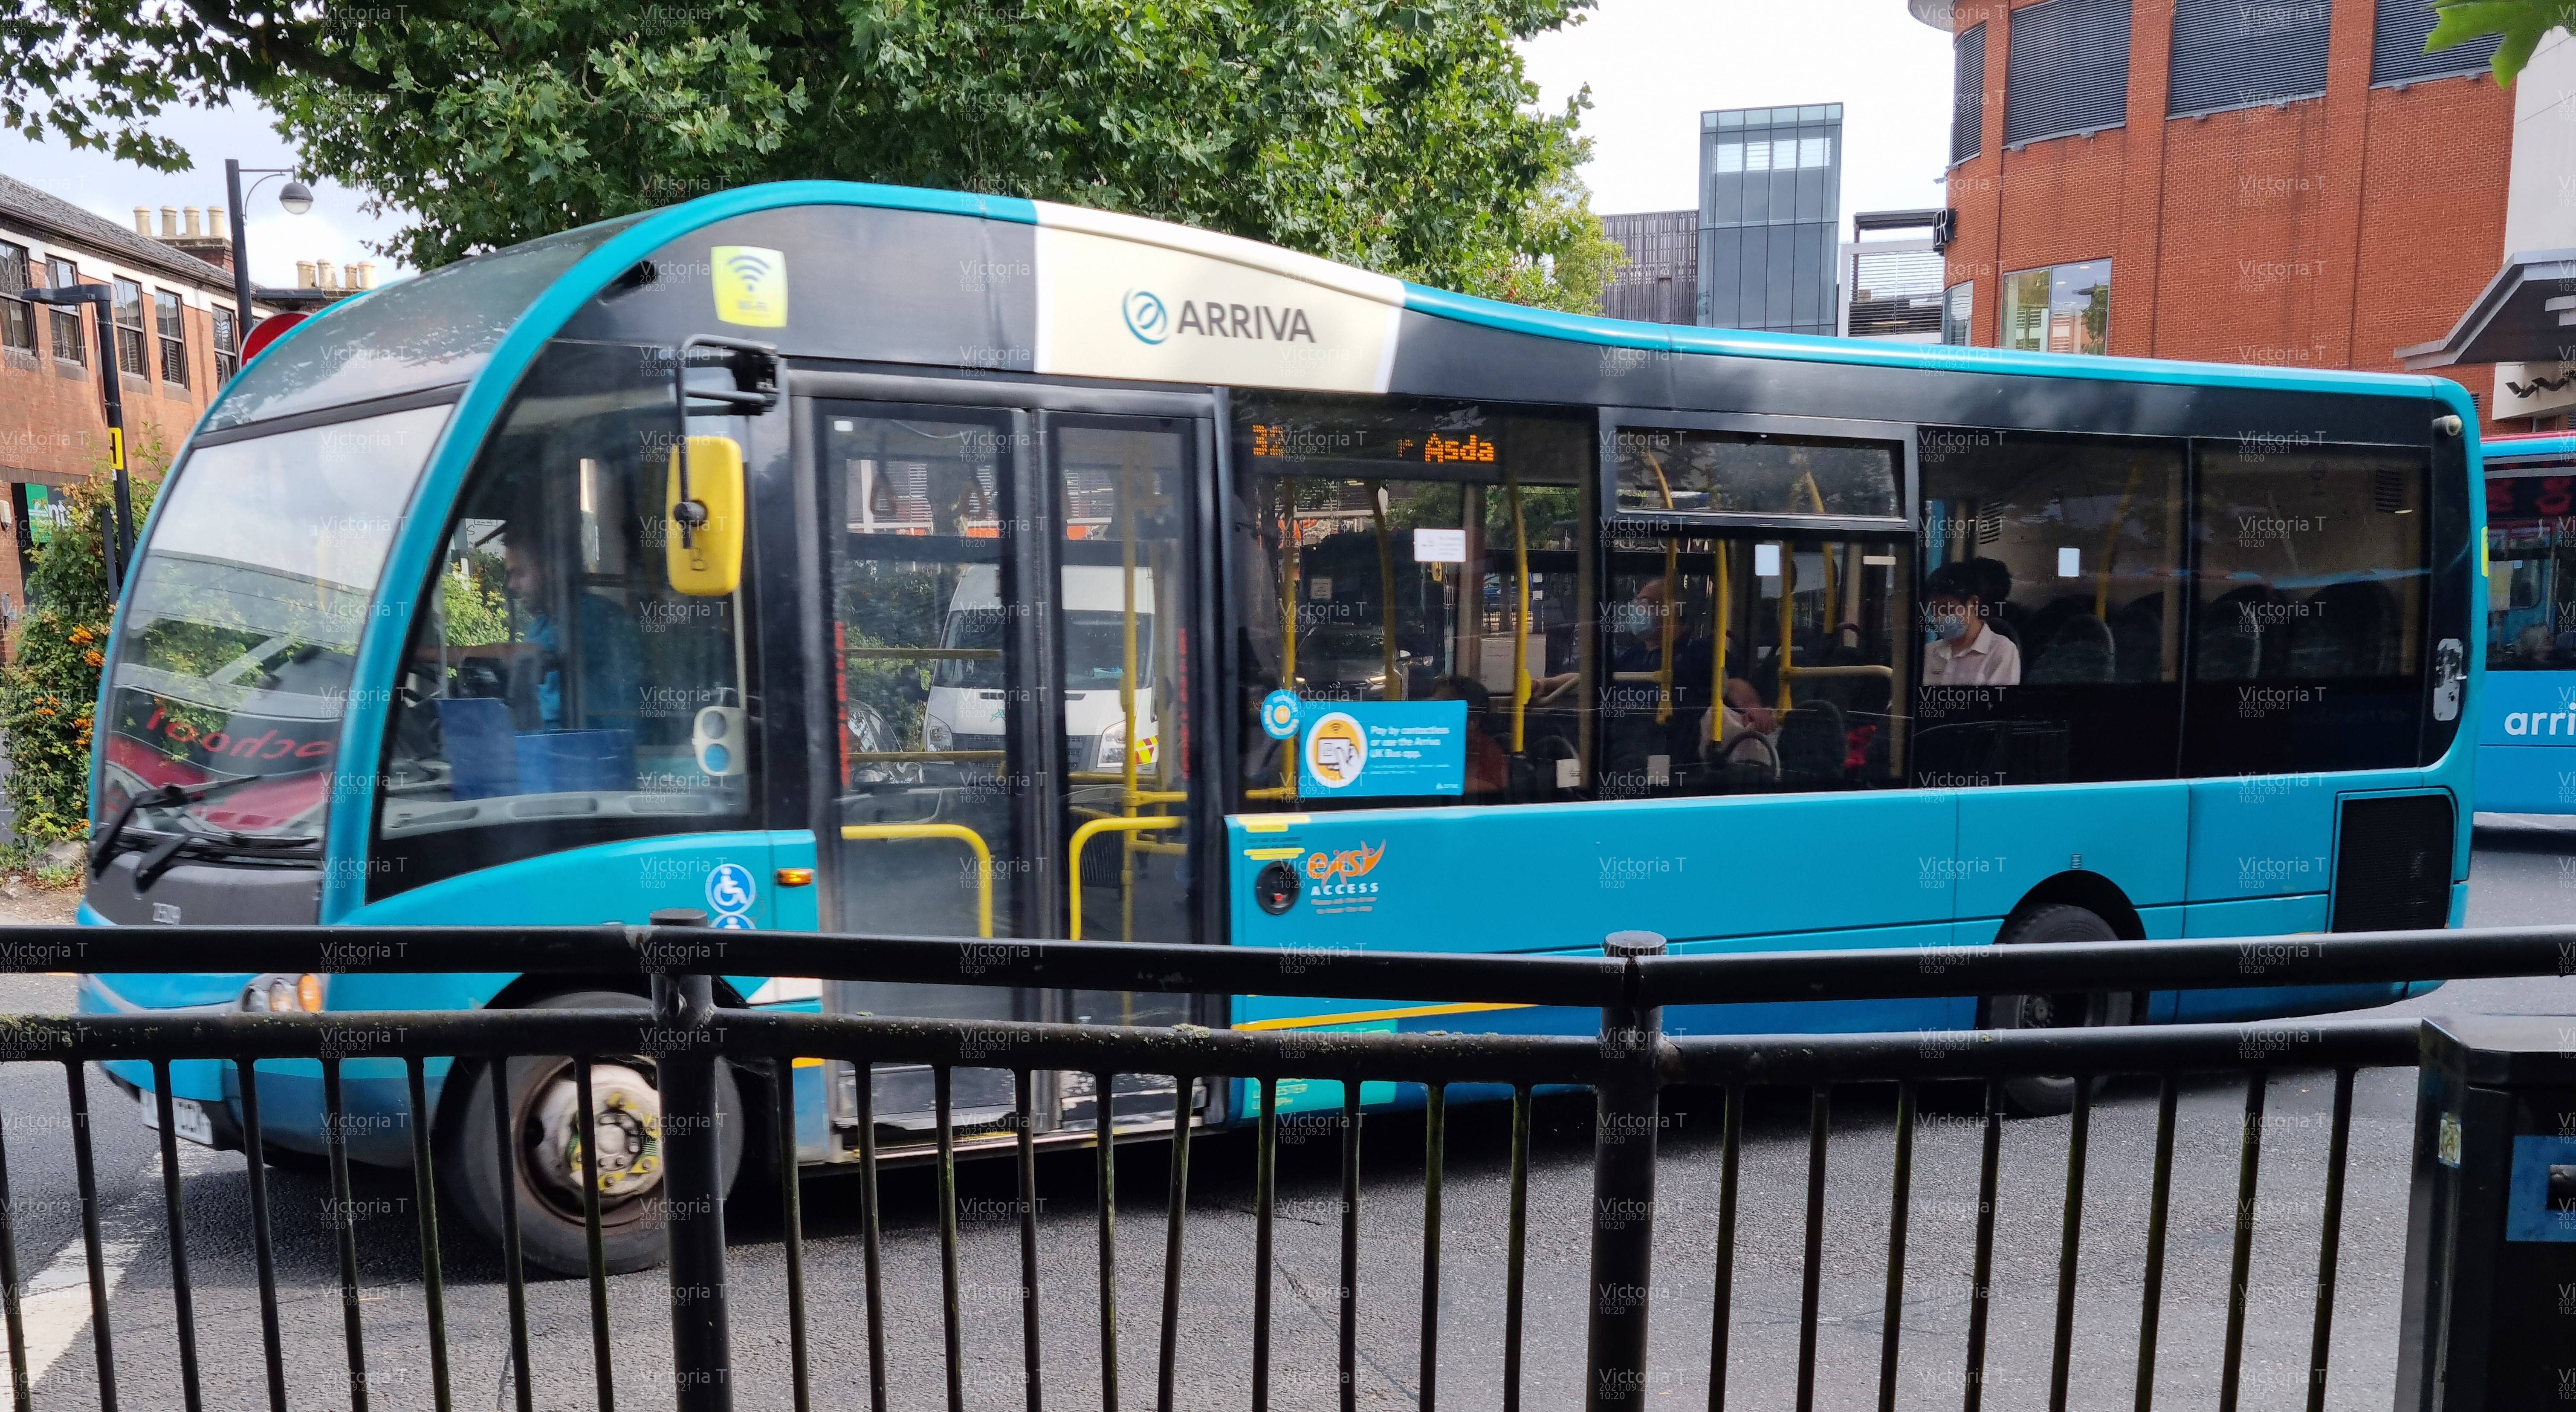 Picture of an Optare Solo SR vehicle. Image credited to Victoria T.